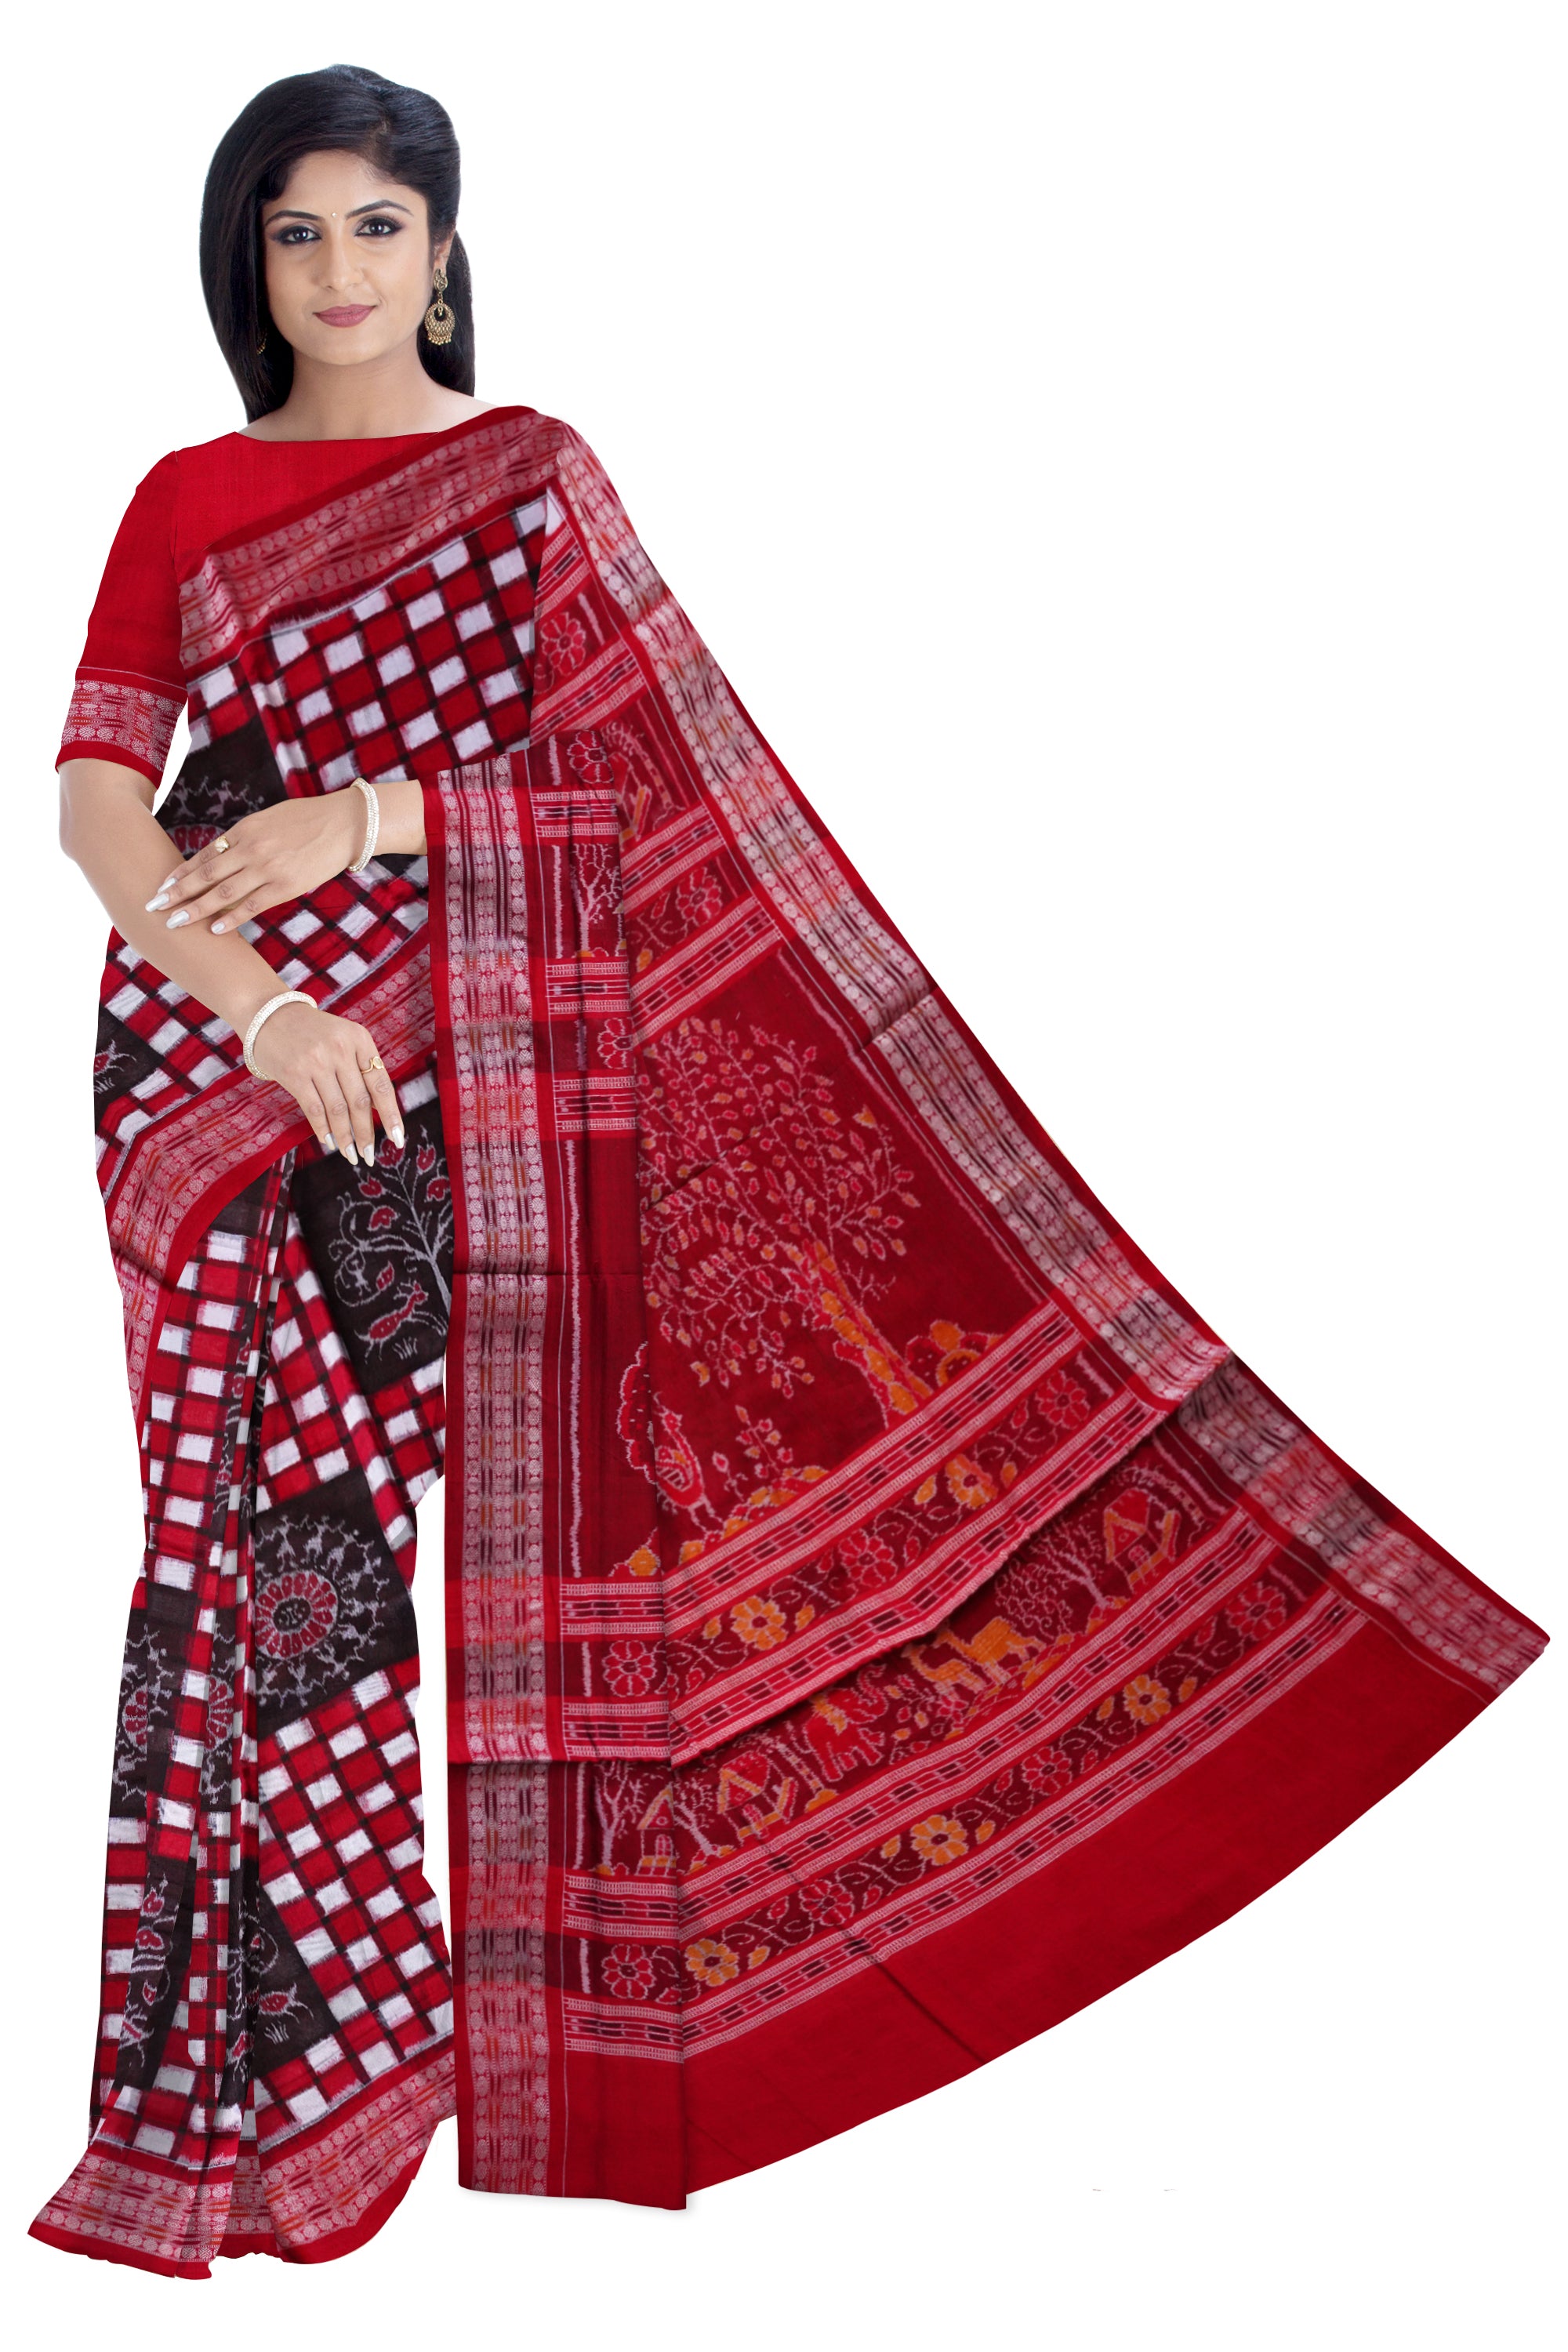 Traditional Pasapali with village pattern pure cotton saree is red color. - Koshali Arts & Crafts Enterprise